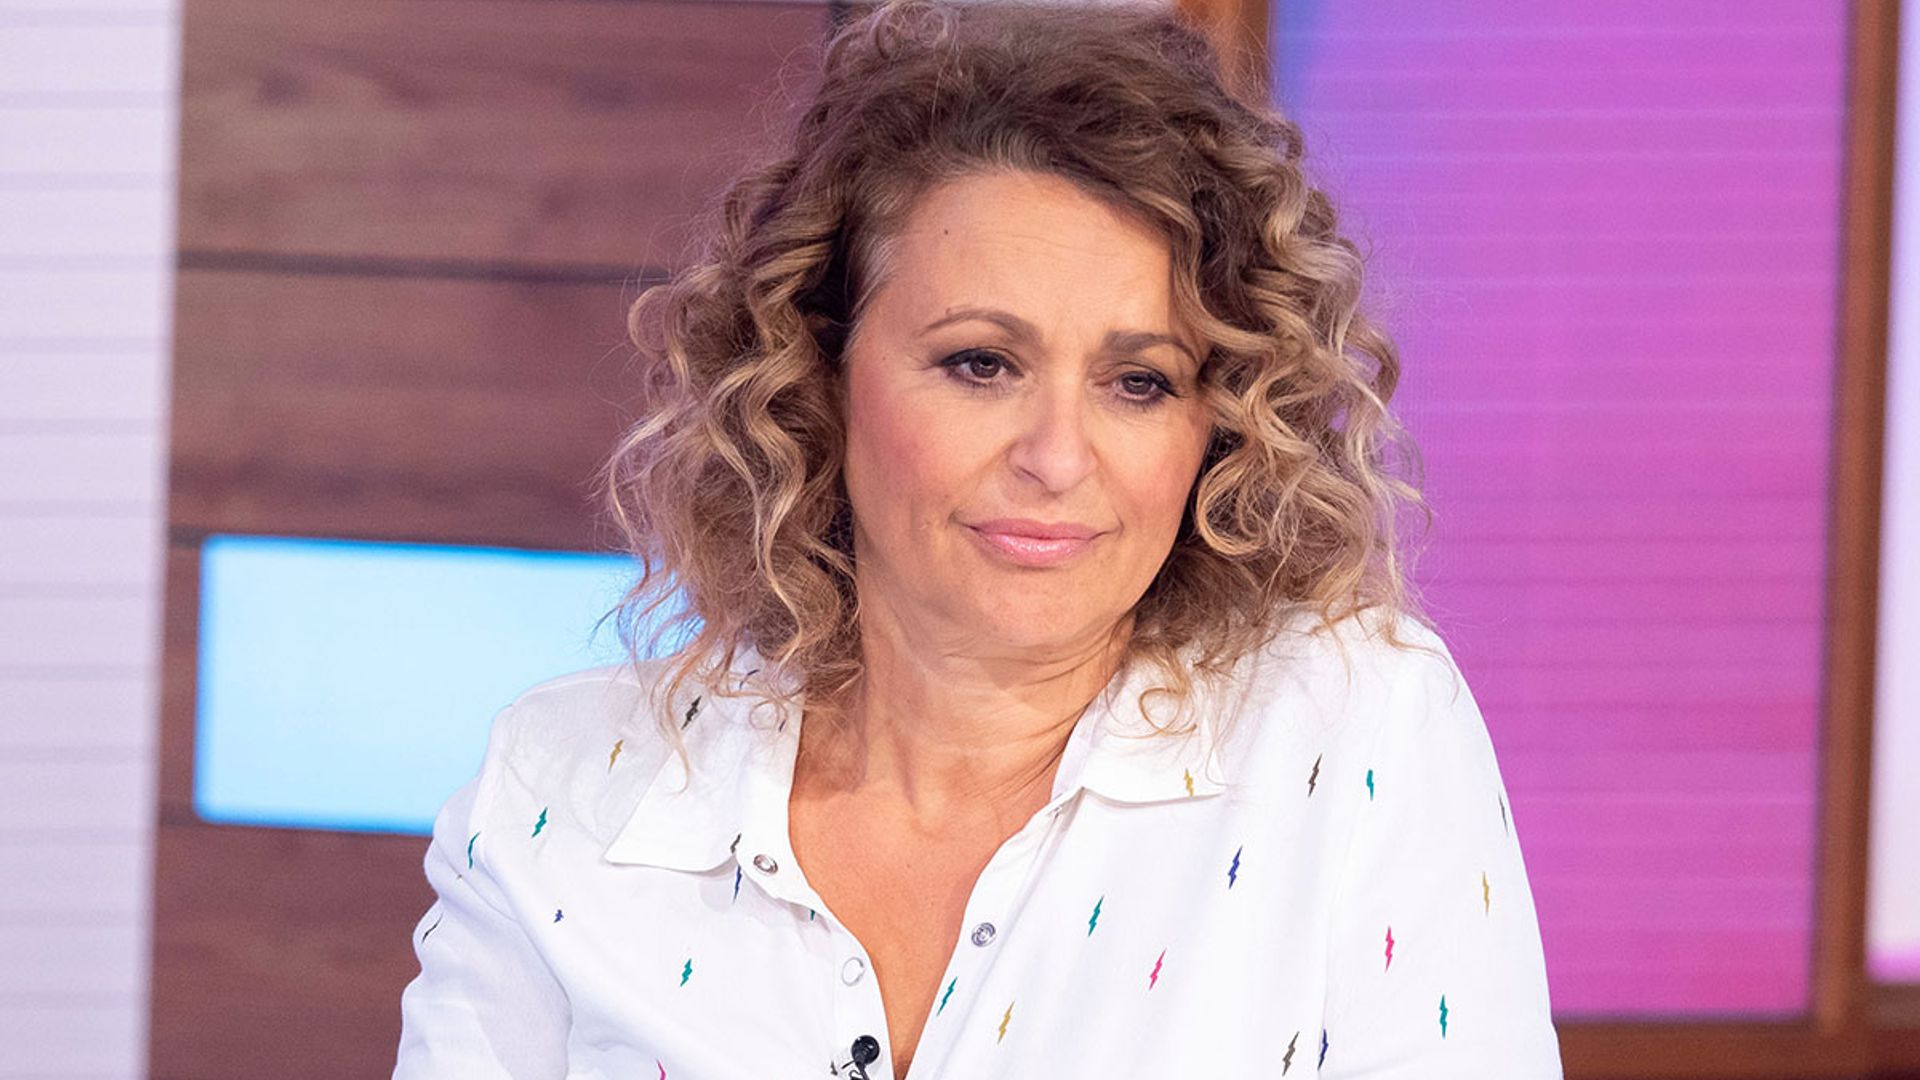 Loose Women's Nadia Sawalha praised for showing 'real' body in